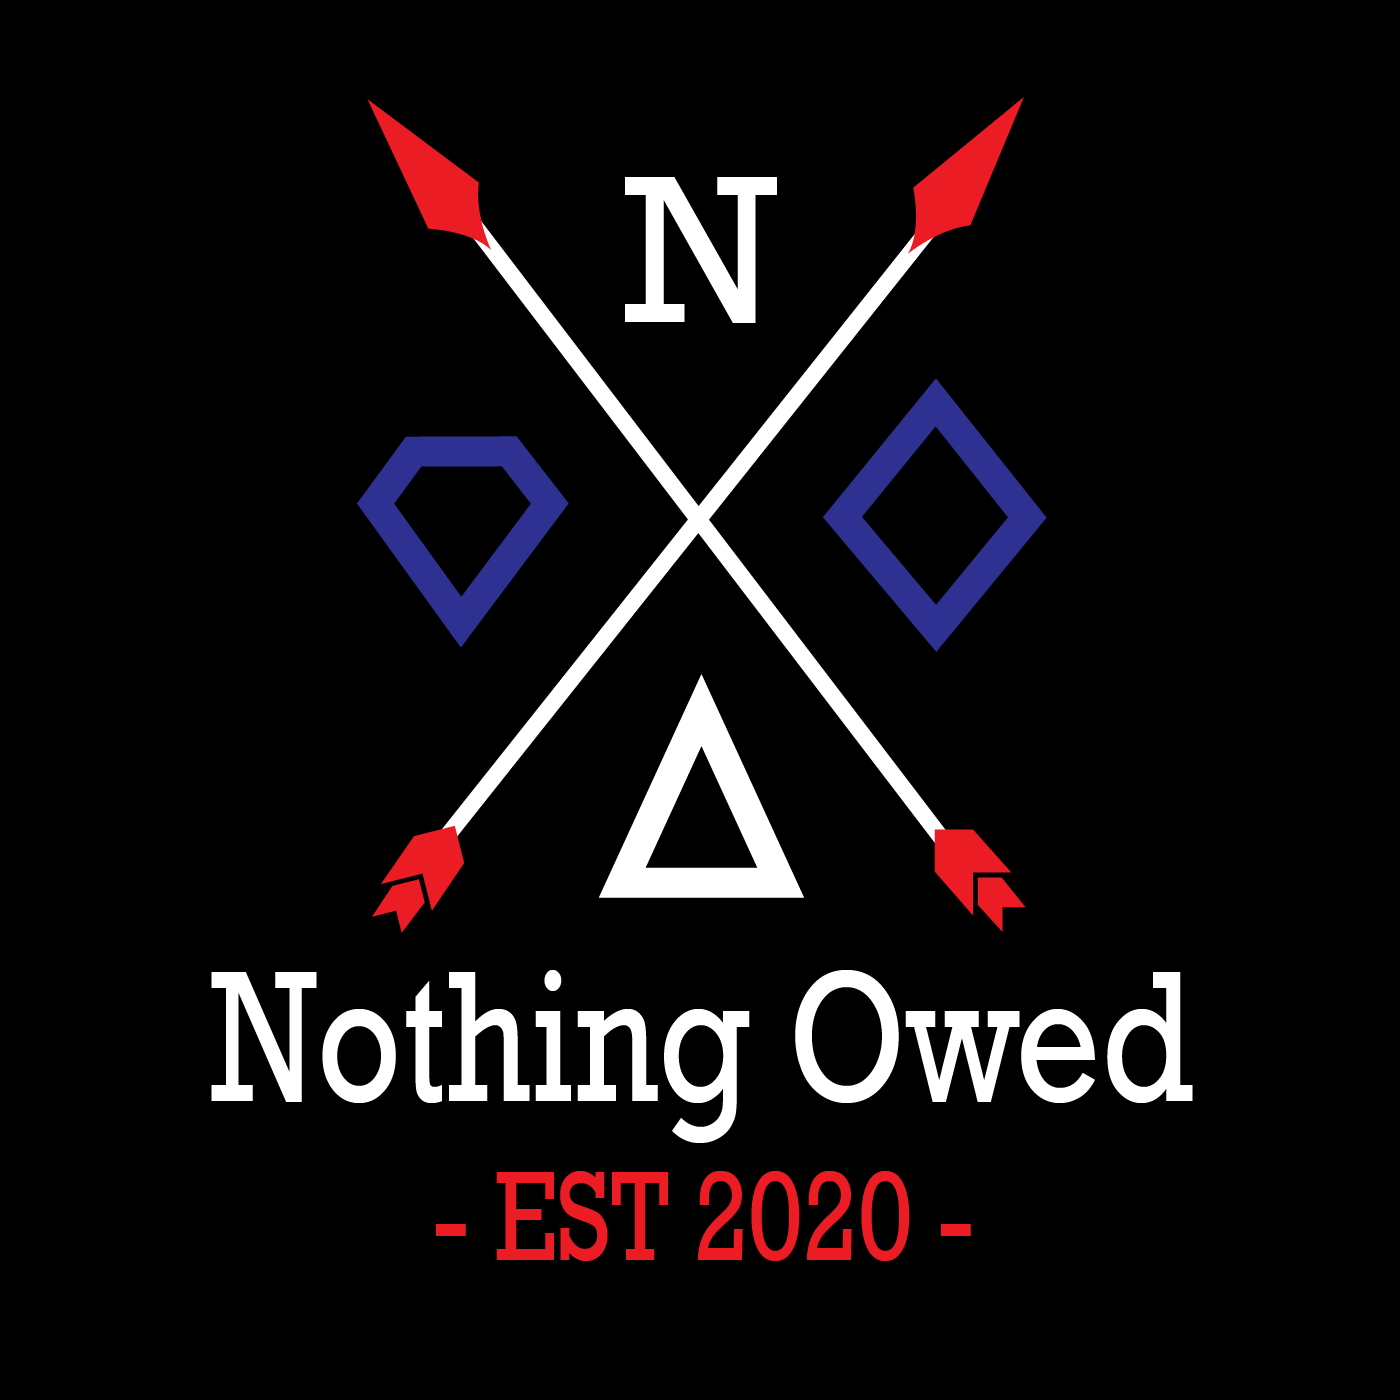 Show artwork for Nothing Owed